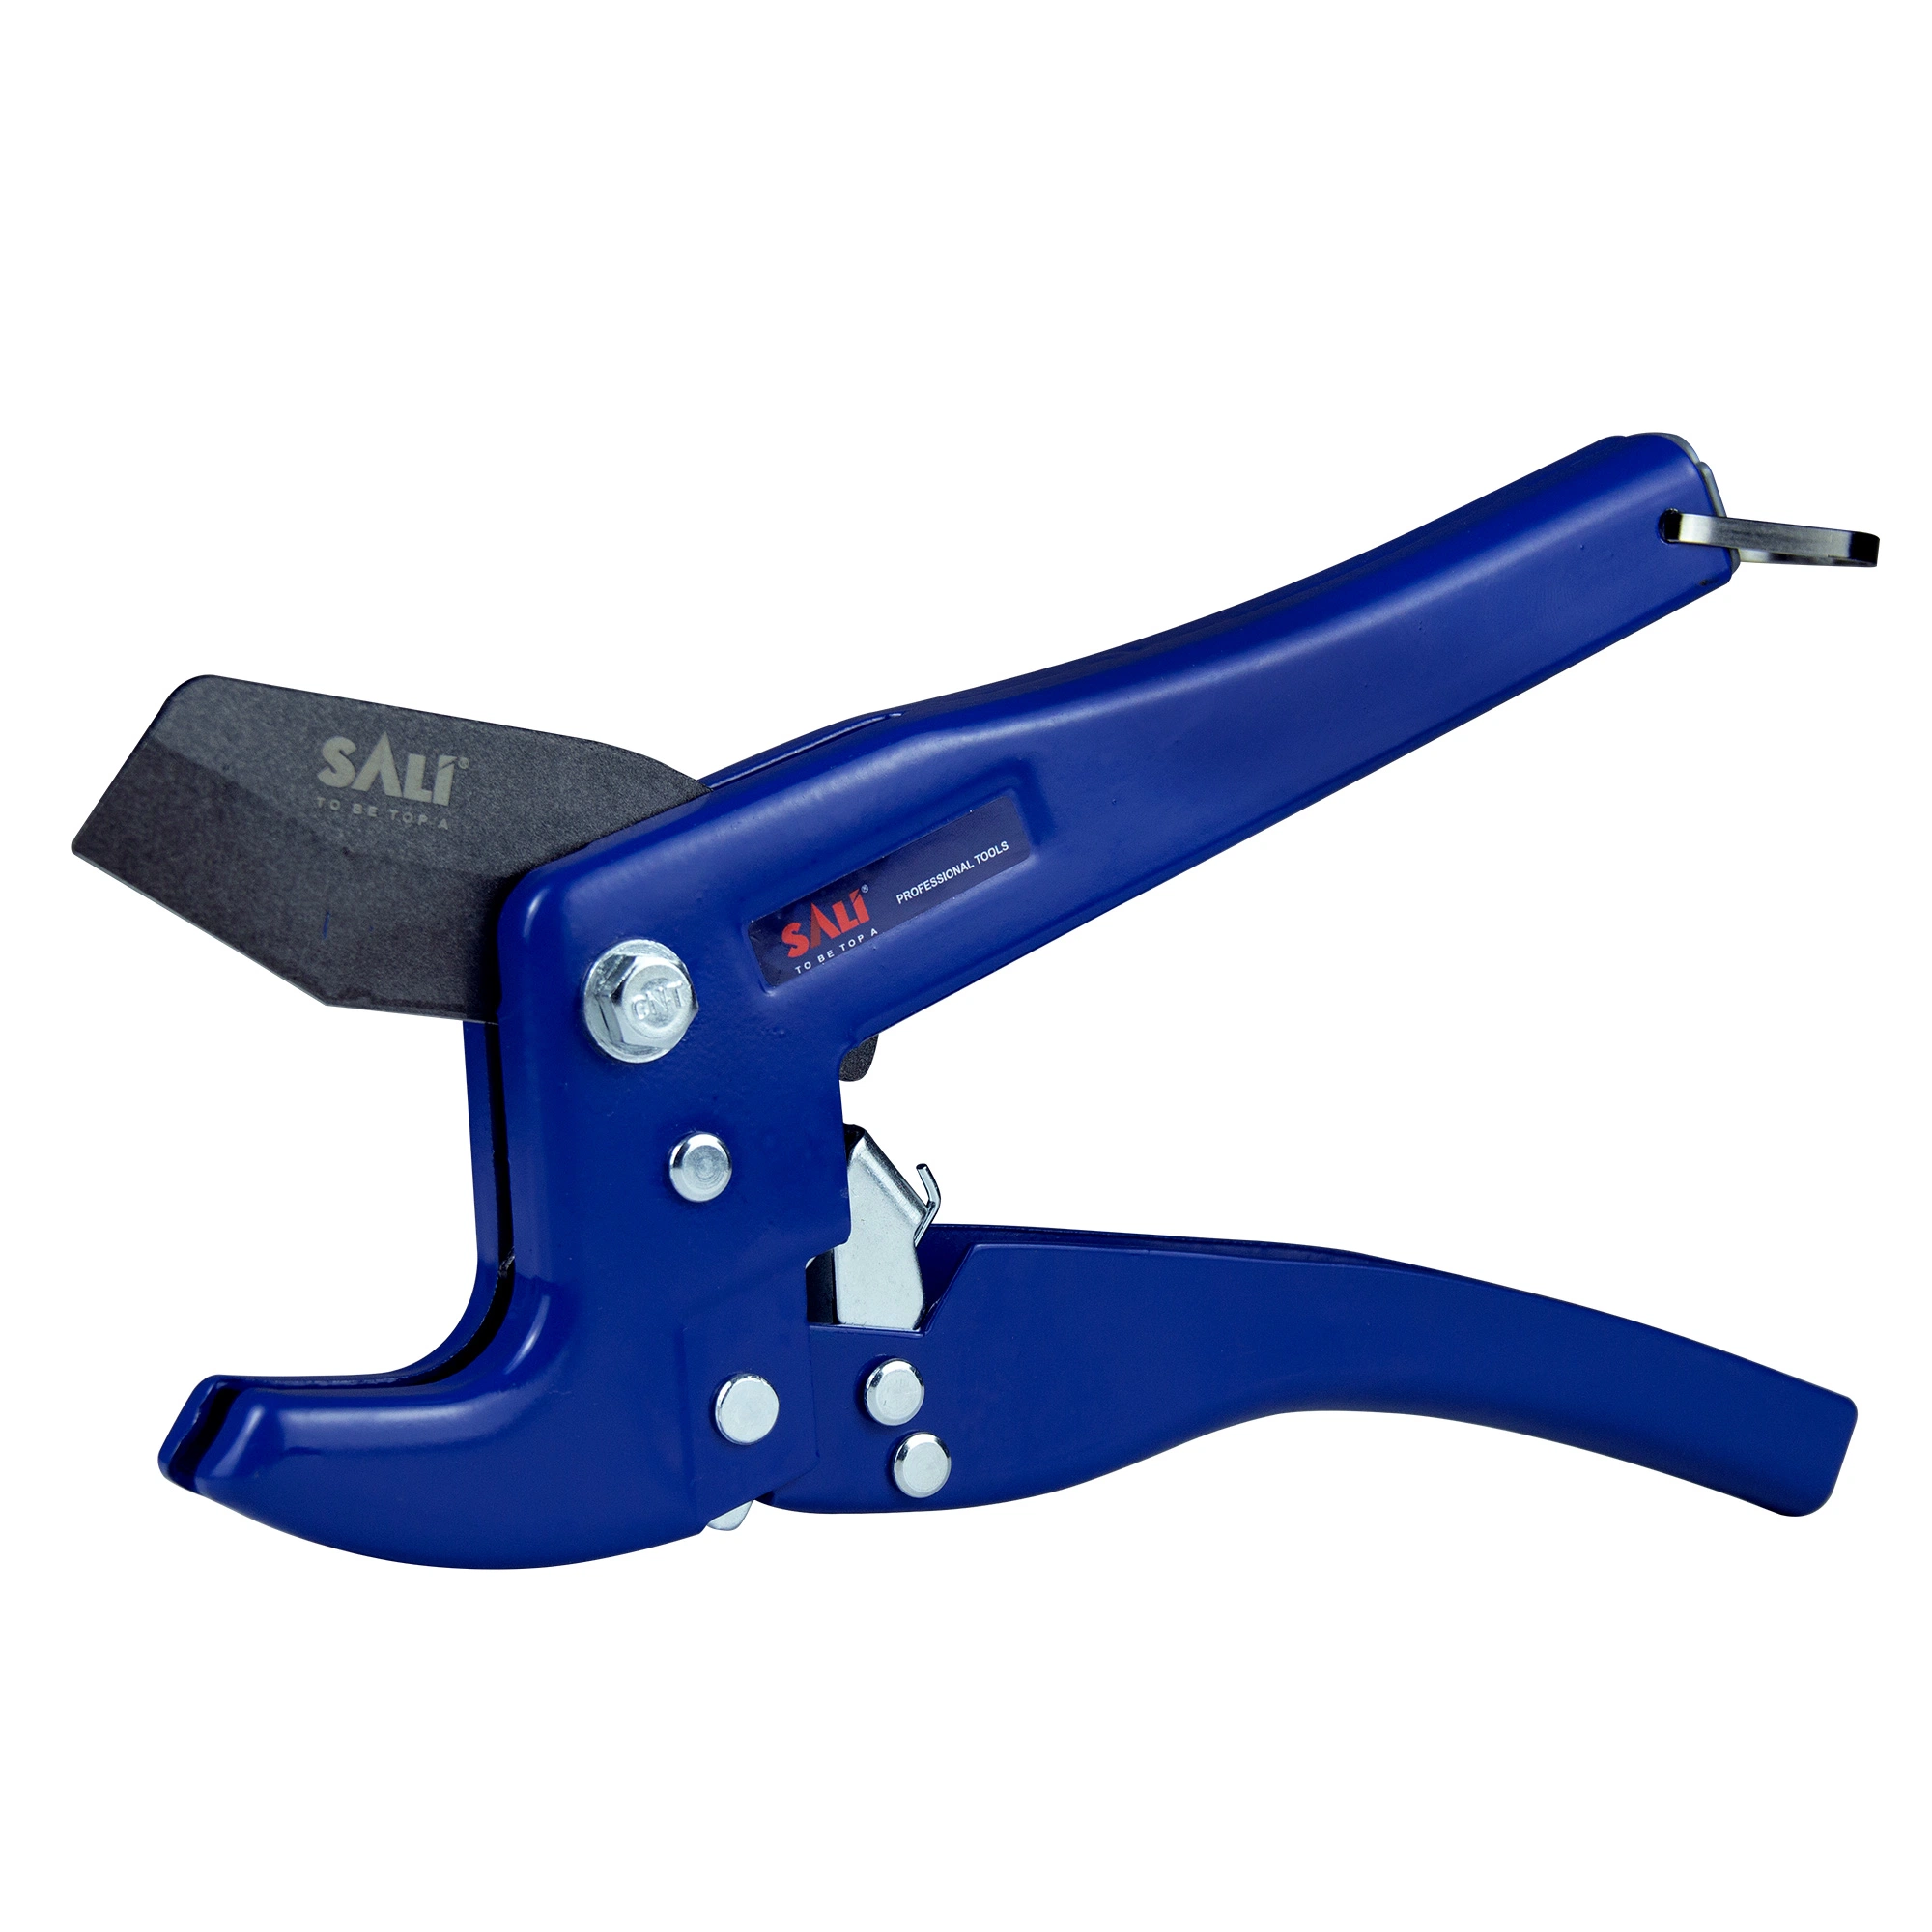 Sali 42mm 65mn Blade Professional Hand Tools PVC Pipe Cutter